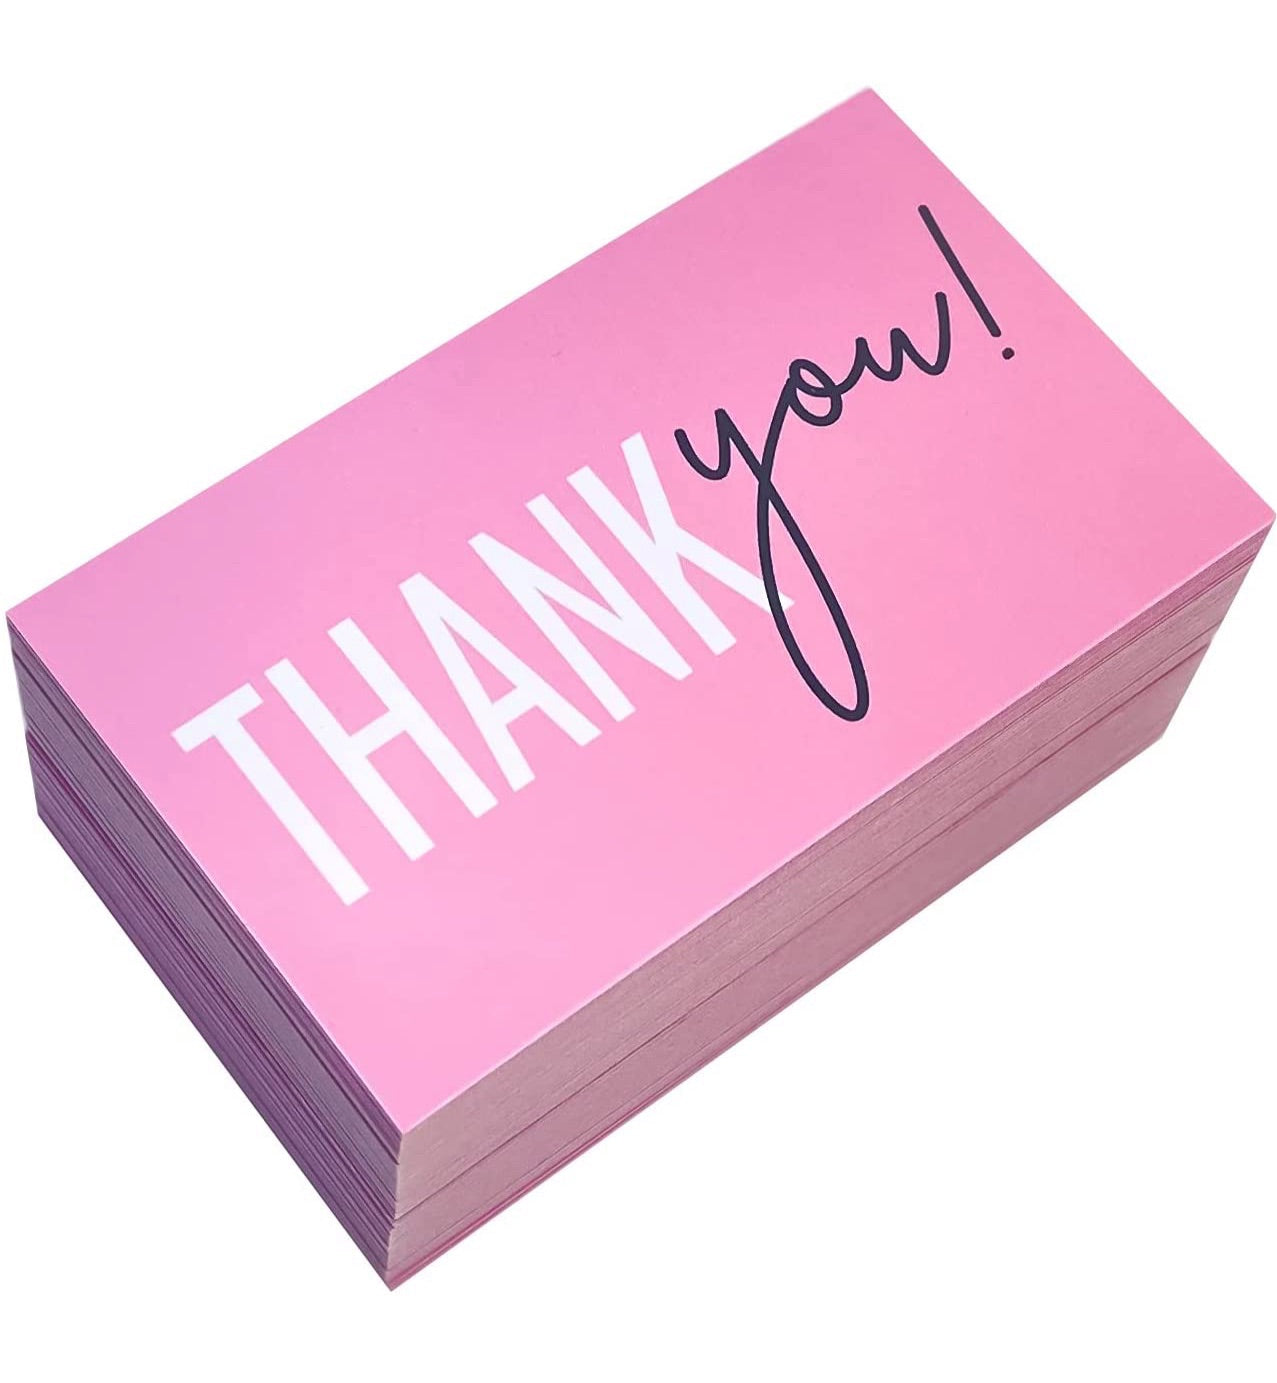 THANK YOU CARDS (100 pieces)